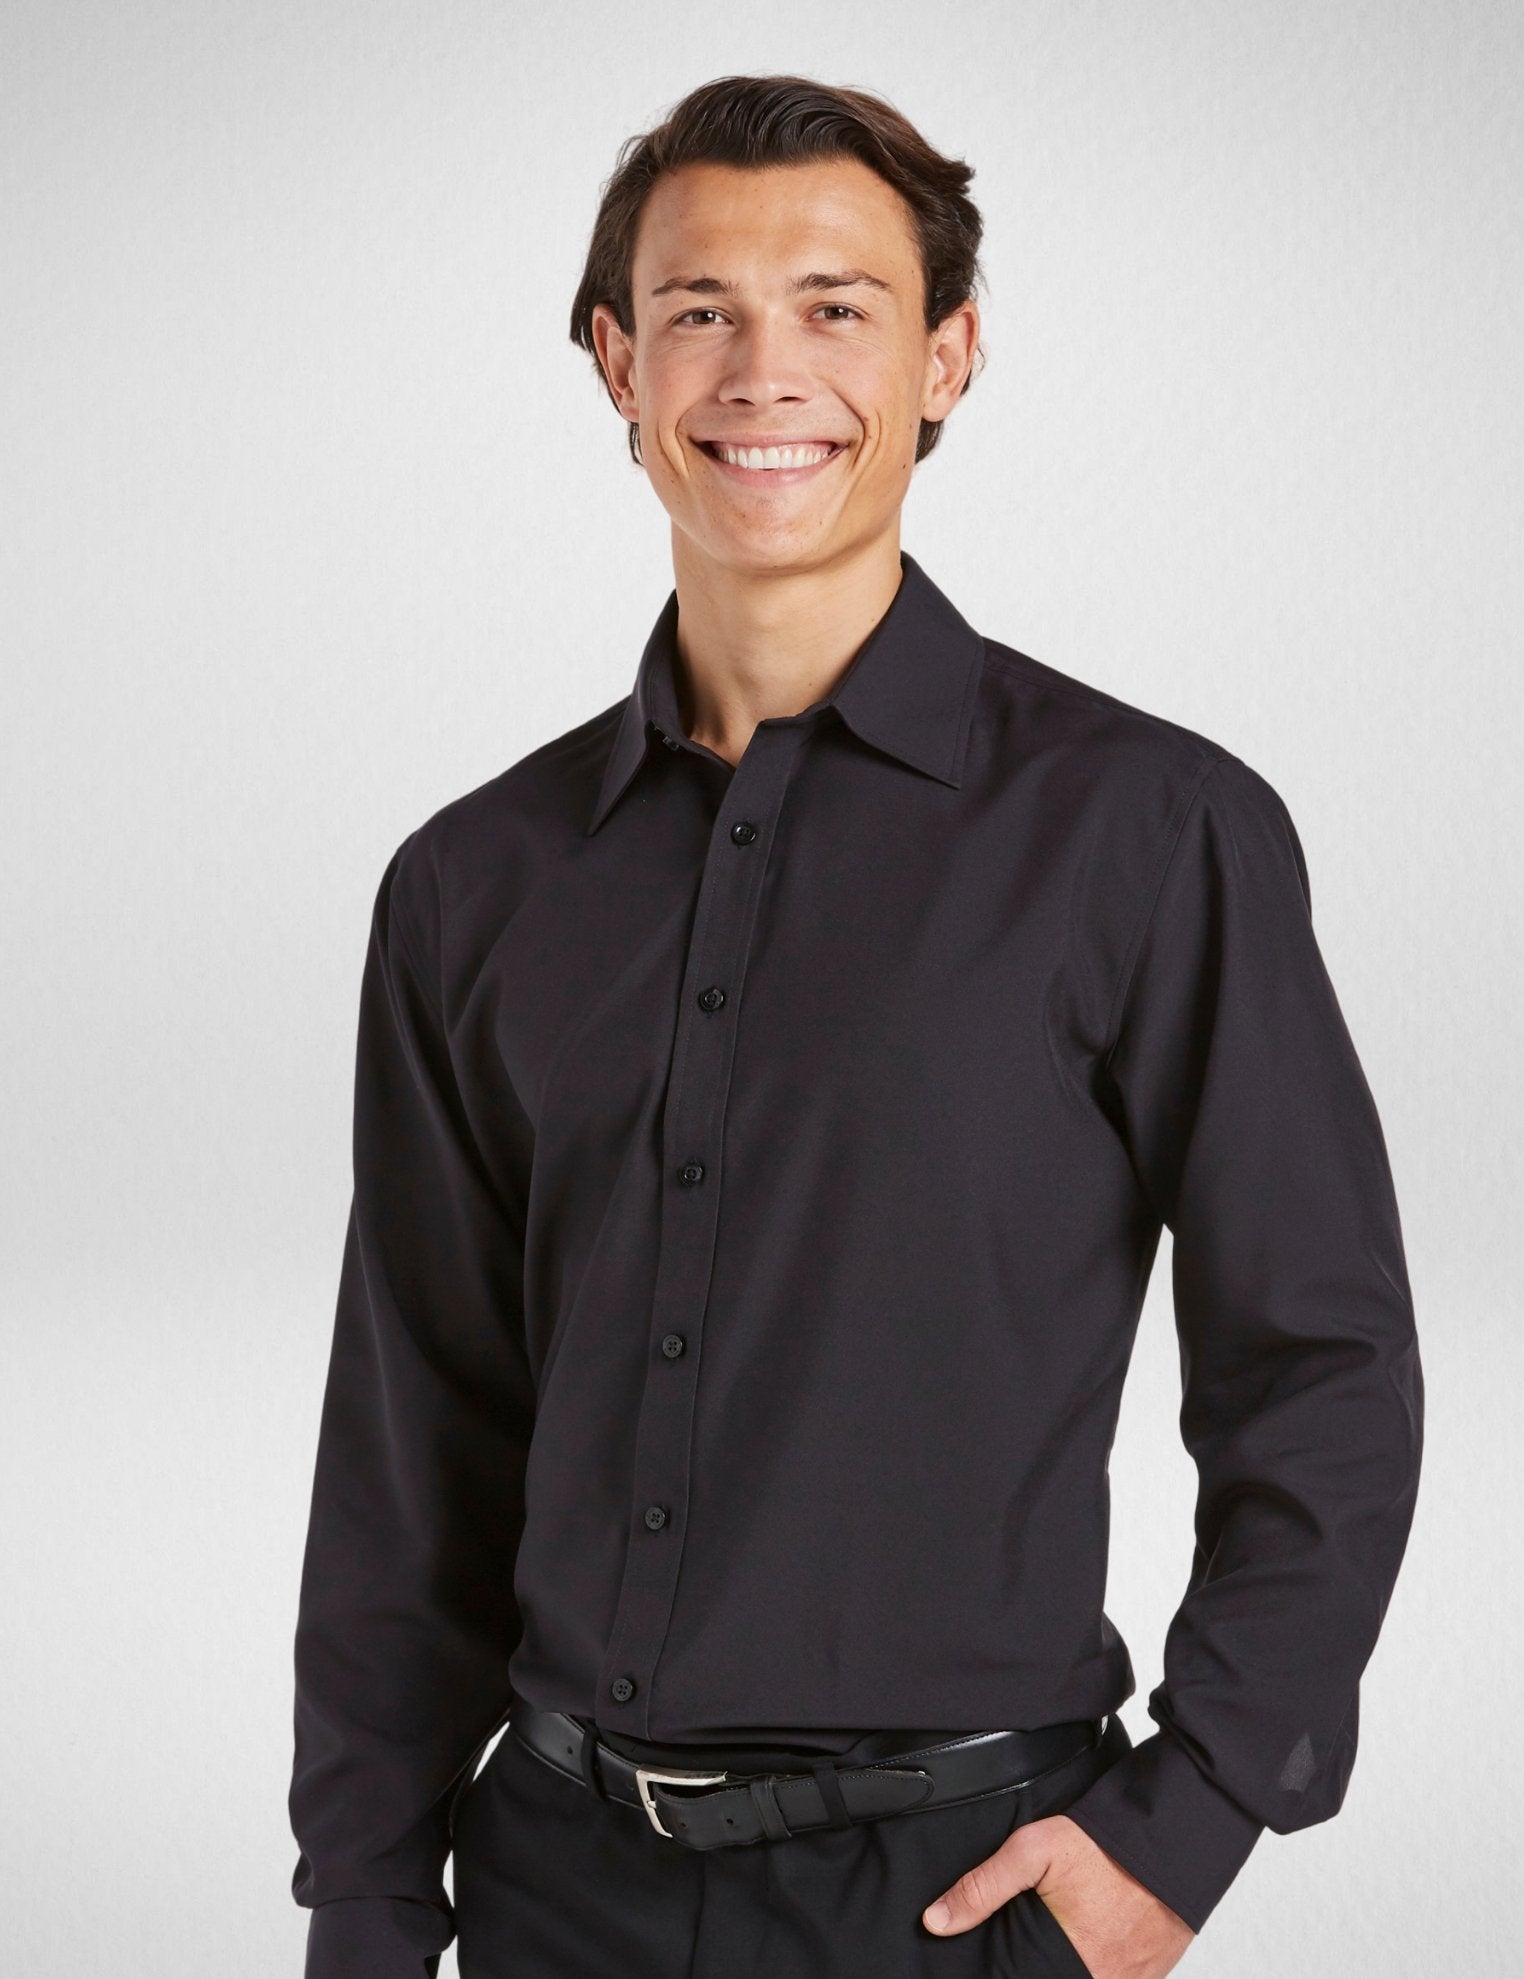 Climate Smart - Mens easy fit long sleeve - Corporate Reflection